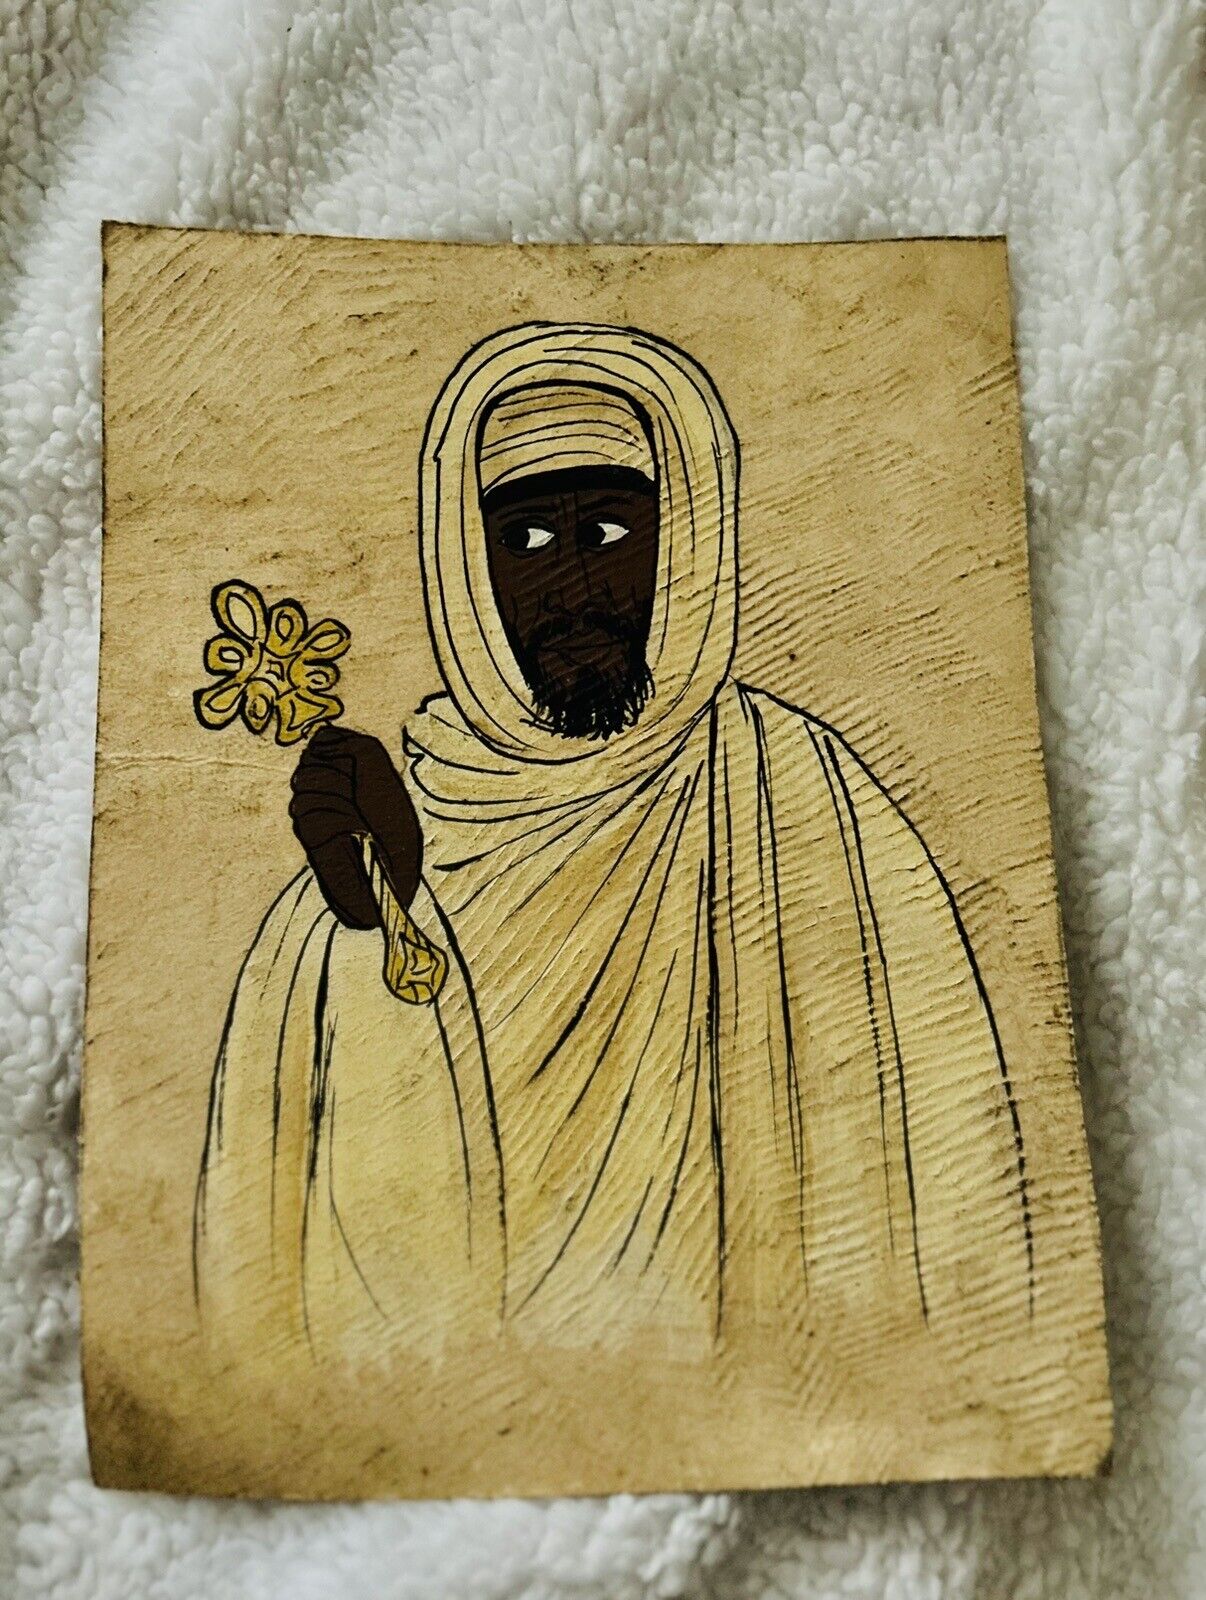 Unique Hand Crafted Ethiopian Painting On Leather 11”x 9”